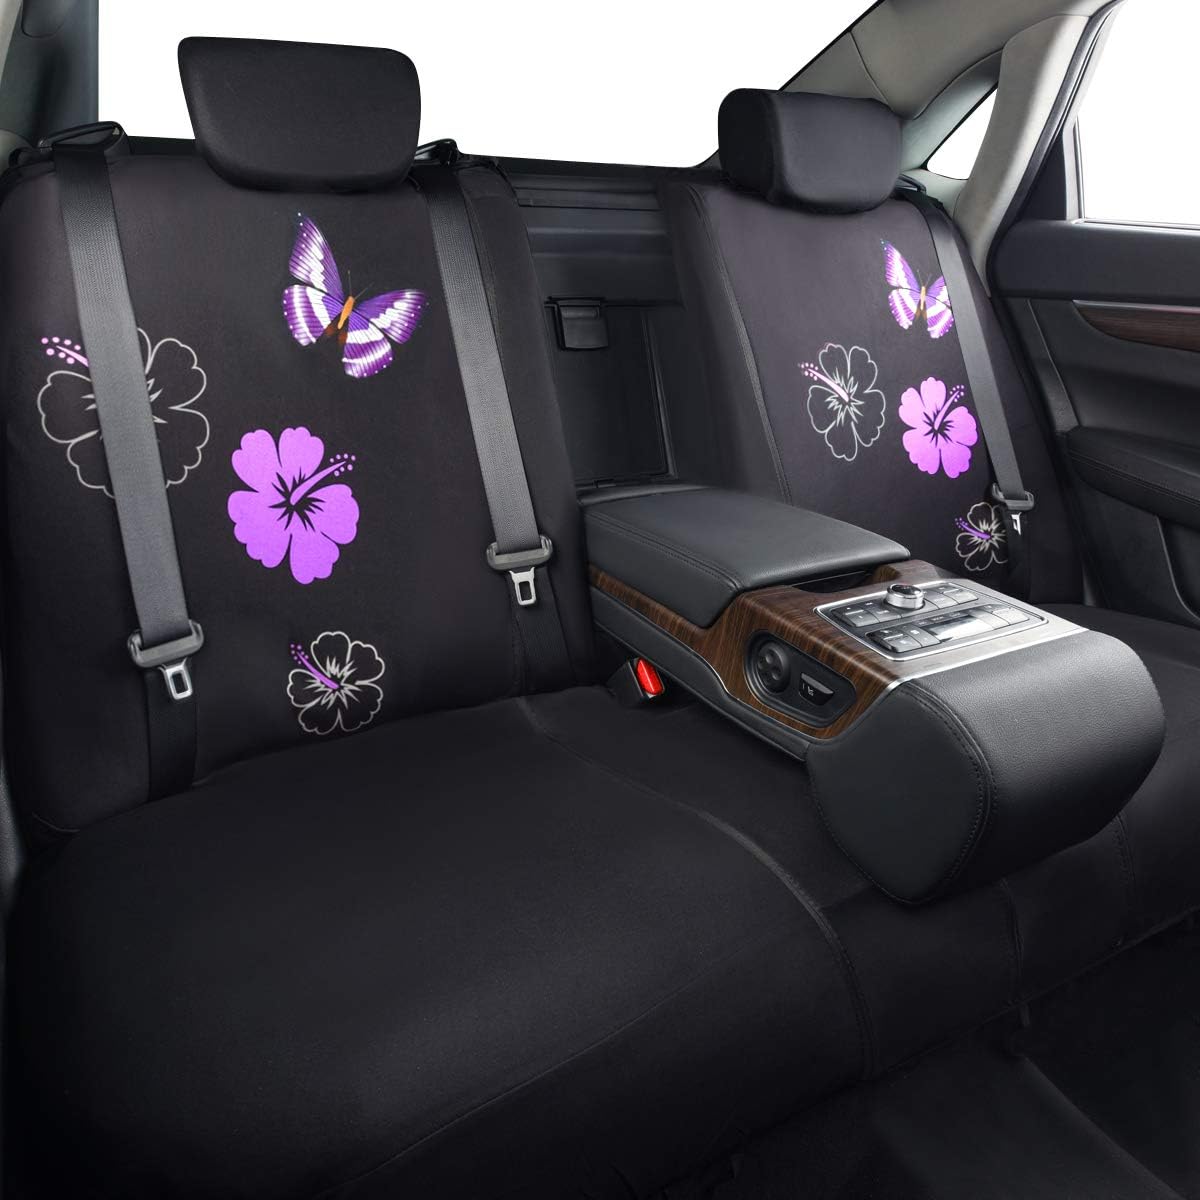 CAR PASS Universal Fabric Car Seat Covers,Print Purple Flower and Butterfly Seat Covers Full Set with Airbag Compatible, Fit Sedans,Cars,Vans,Suitable for Women & Girly (Black and Purple)